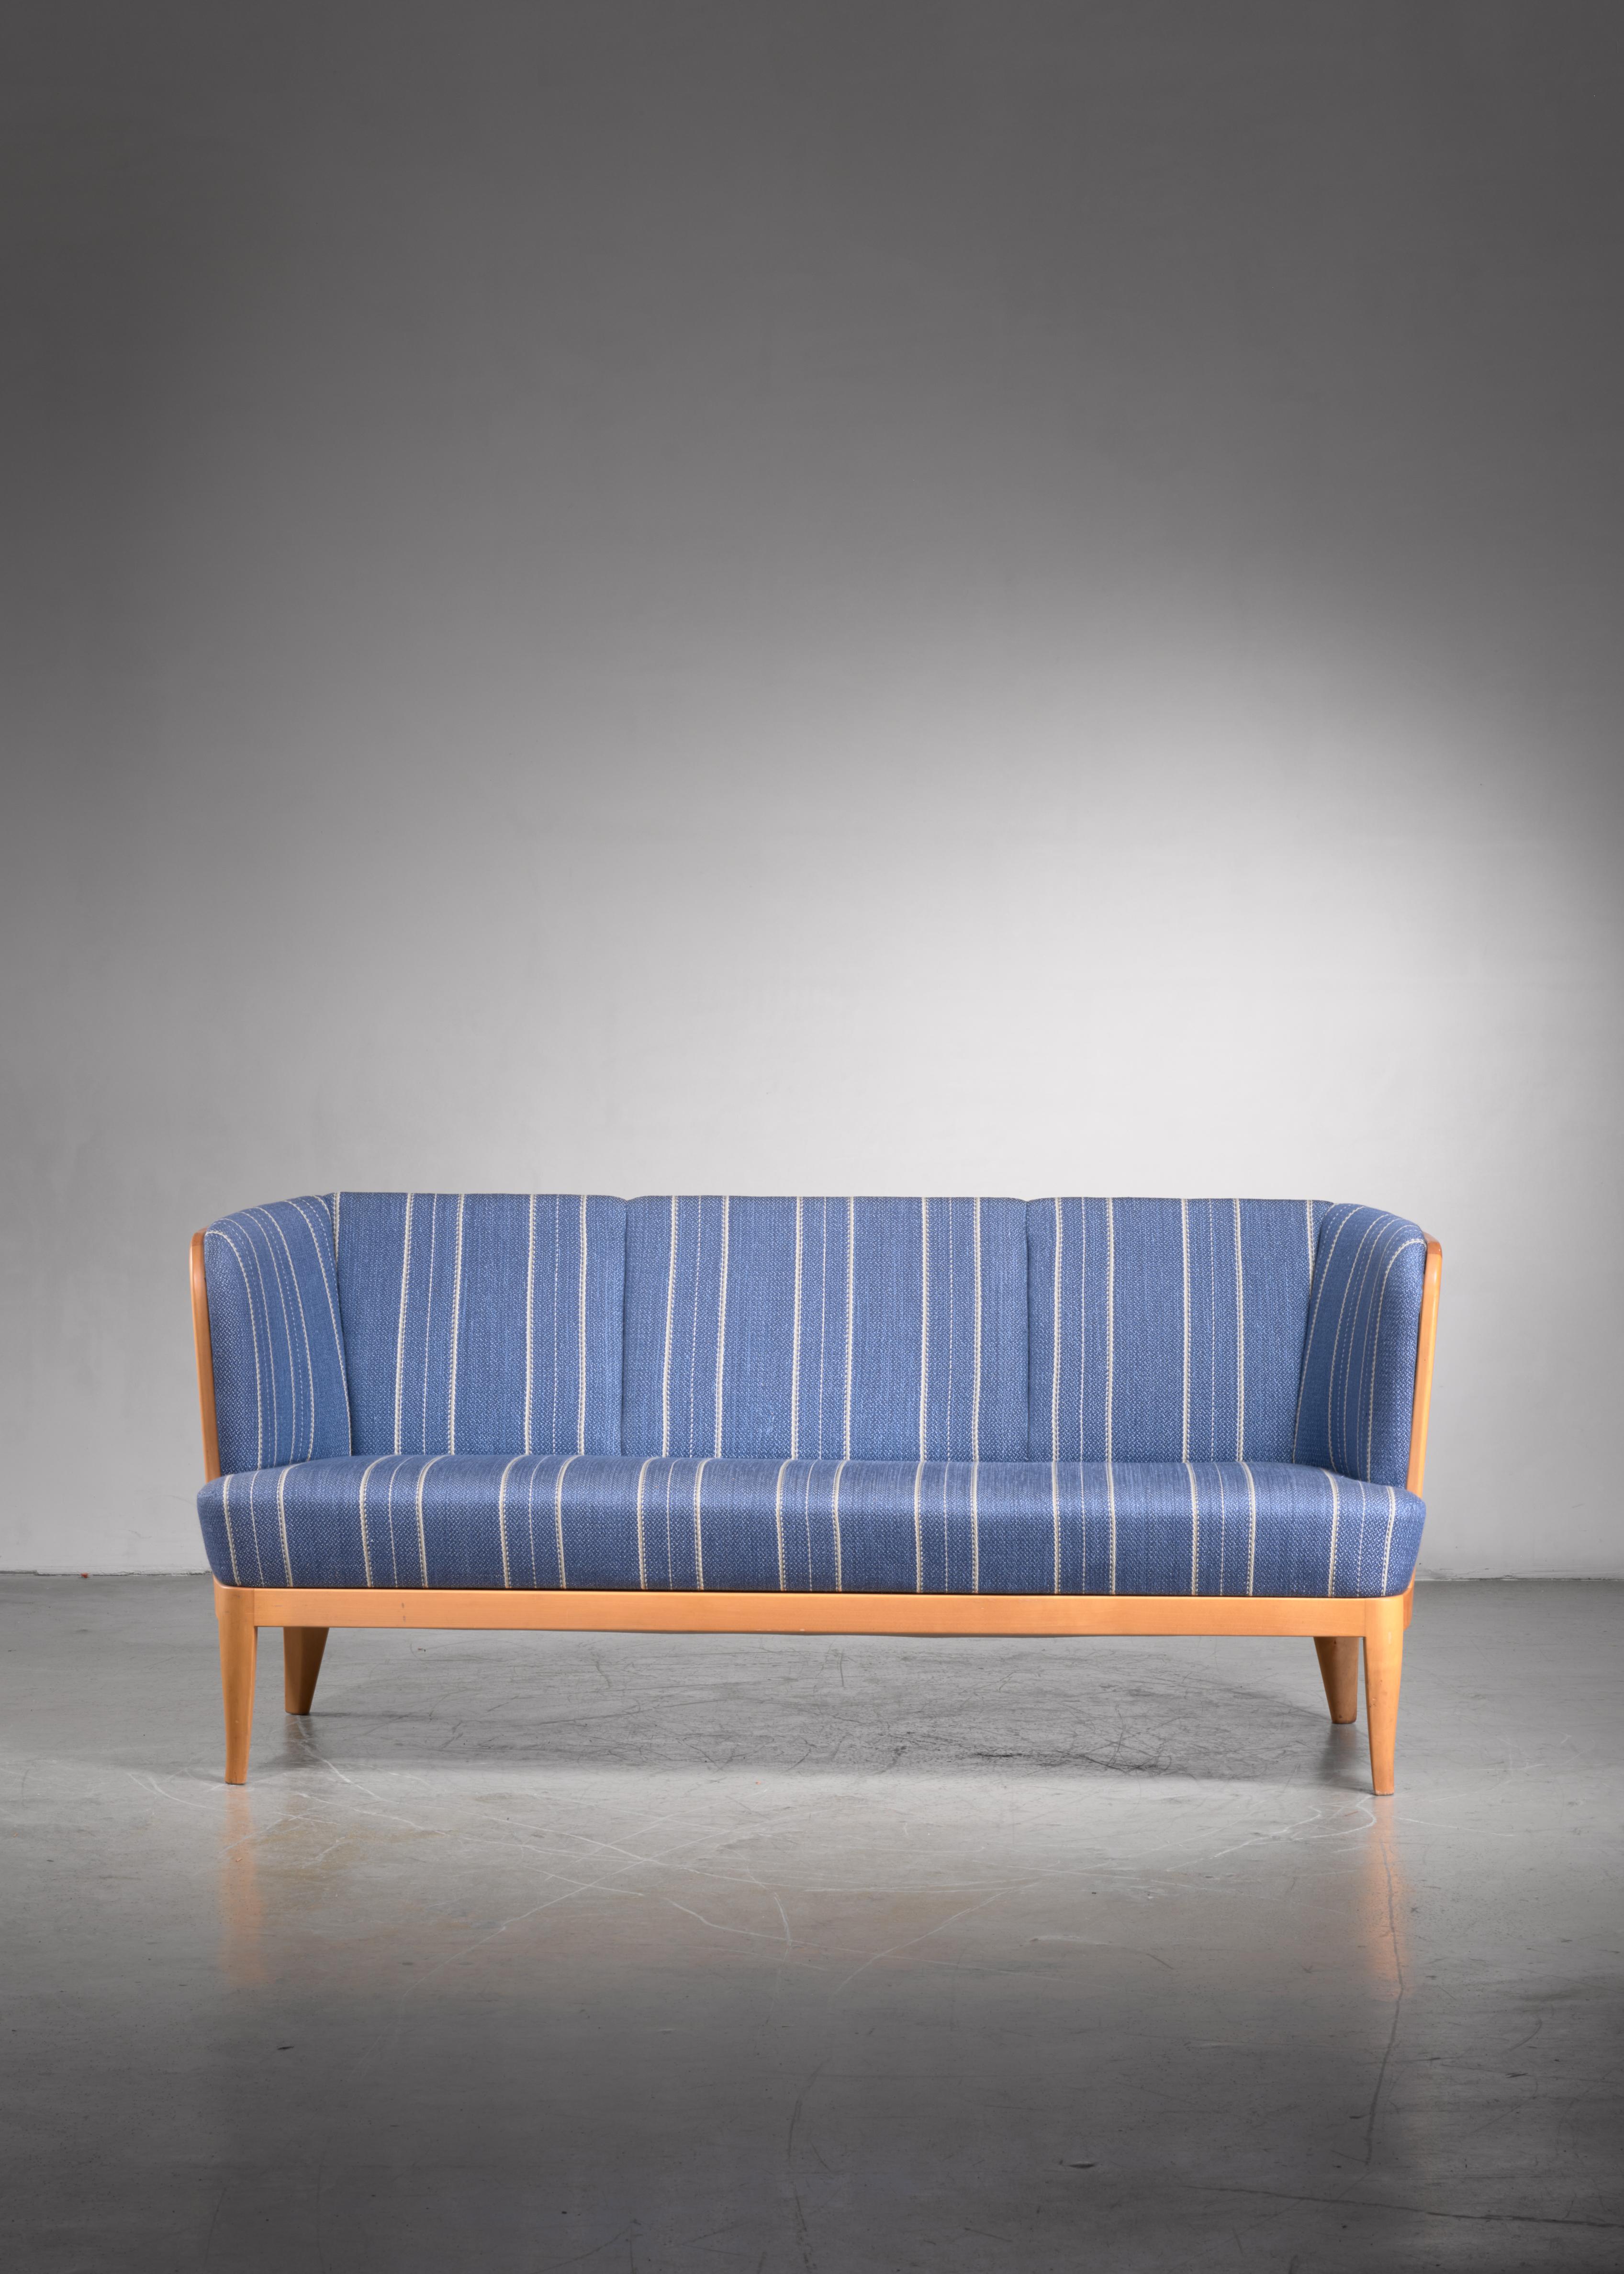 A wonderful three-seater model 'Ulla' sofa by Carl Malmsten. The sofa is made of an elegant birch frame with fixed cushions, upholstered with a wool and cotton fabric in blue and white stripes.

The sofa was designed in 1938 for an exhibition in